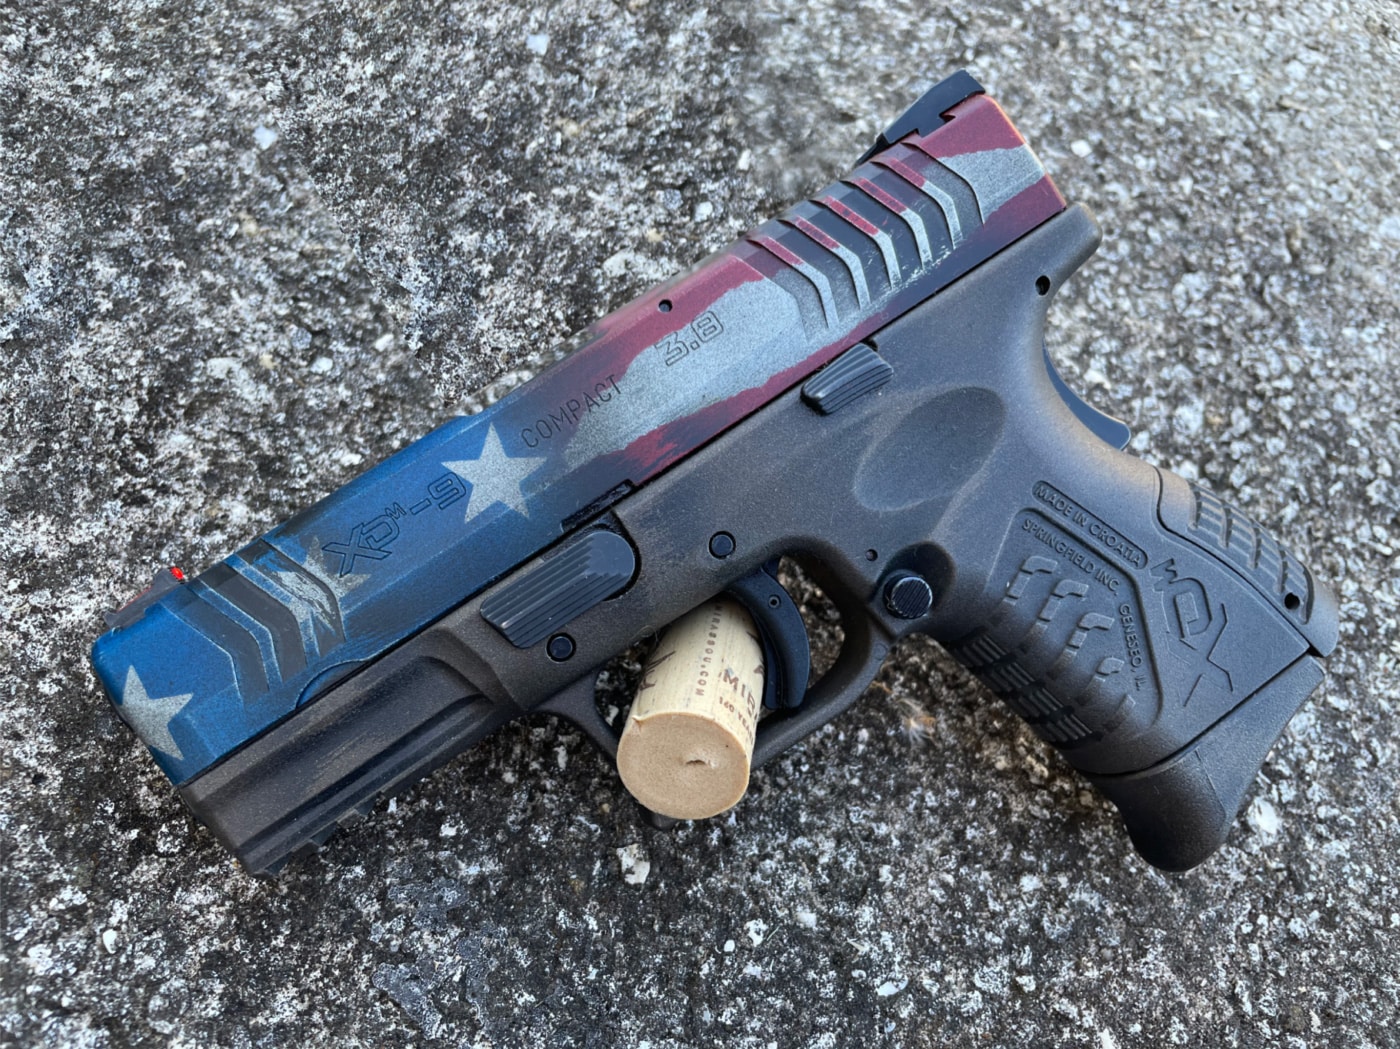 xd-m compact with cerakote